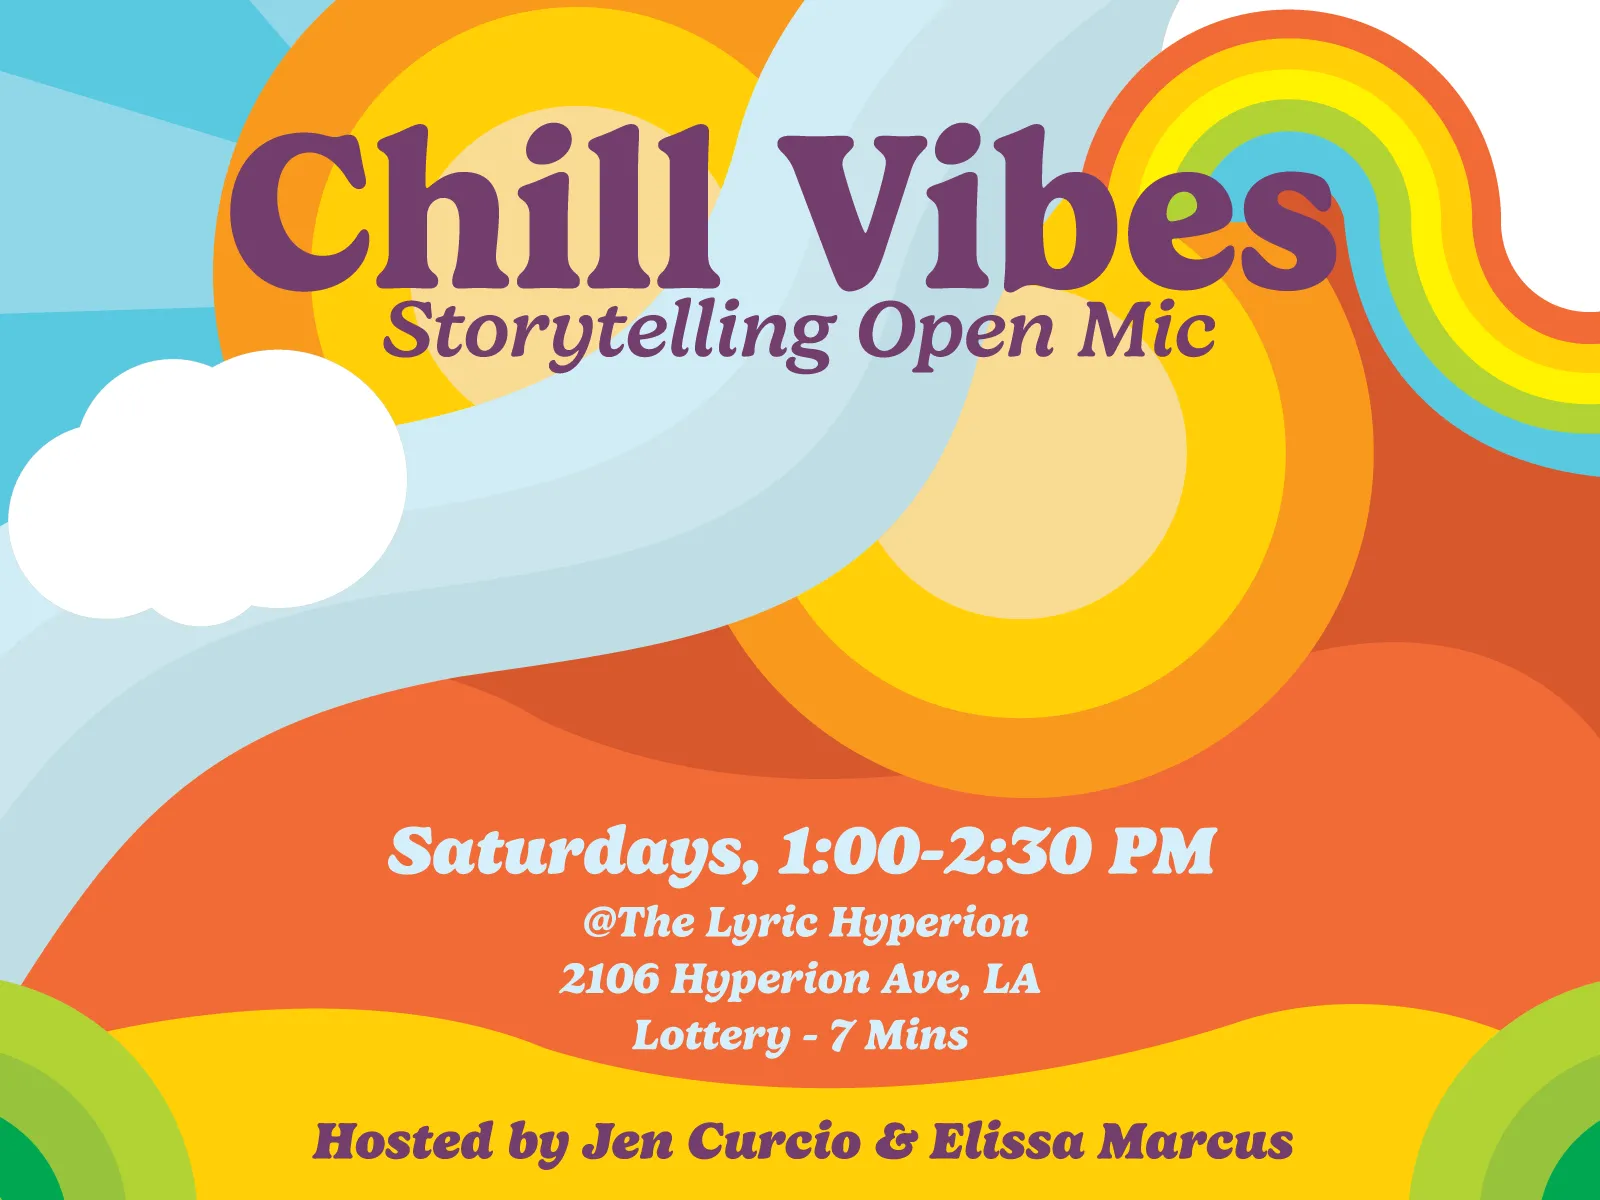 Chill Vibes Storytelling Open Mic With Abstract Rainbow Image